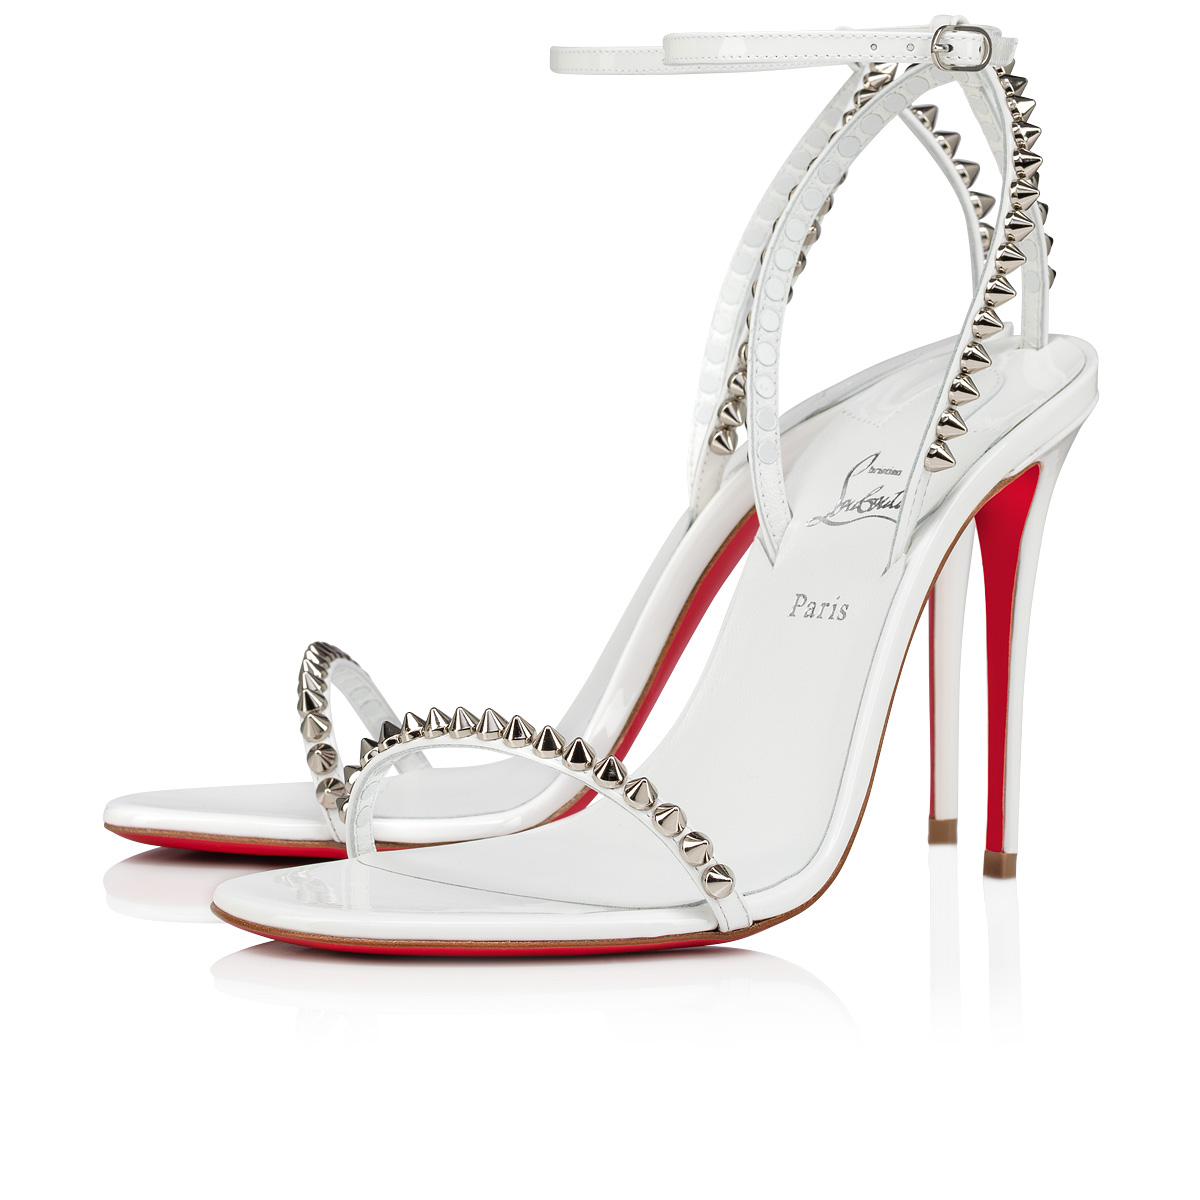 Christian Louboutin Sandals - Men - 23 products